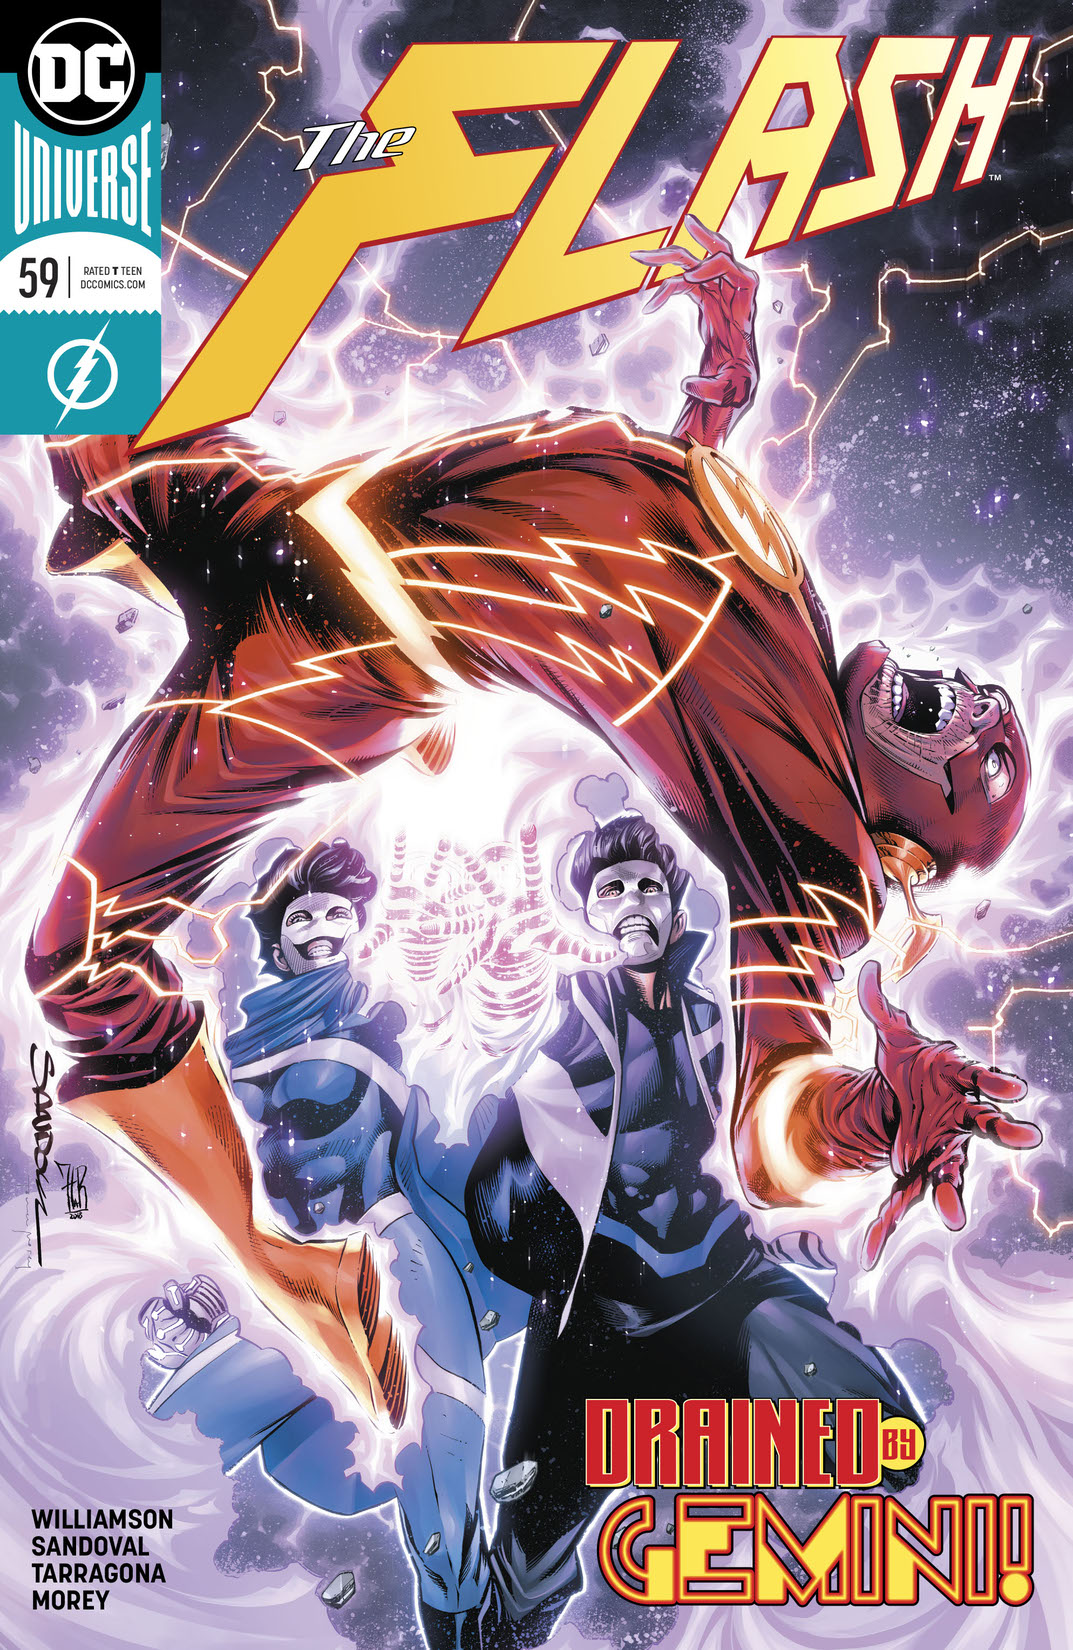 The Flash (2016-) #59 preview images